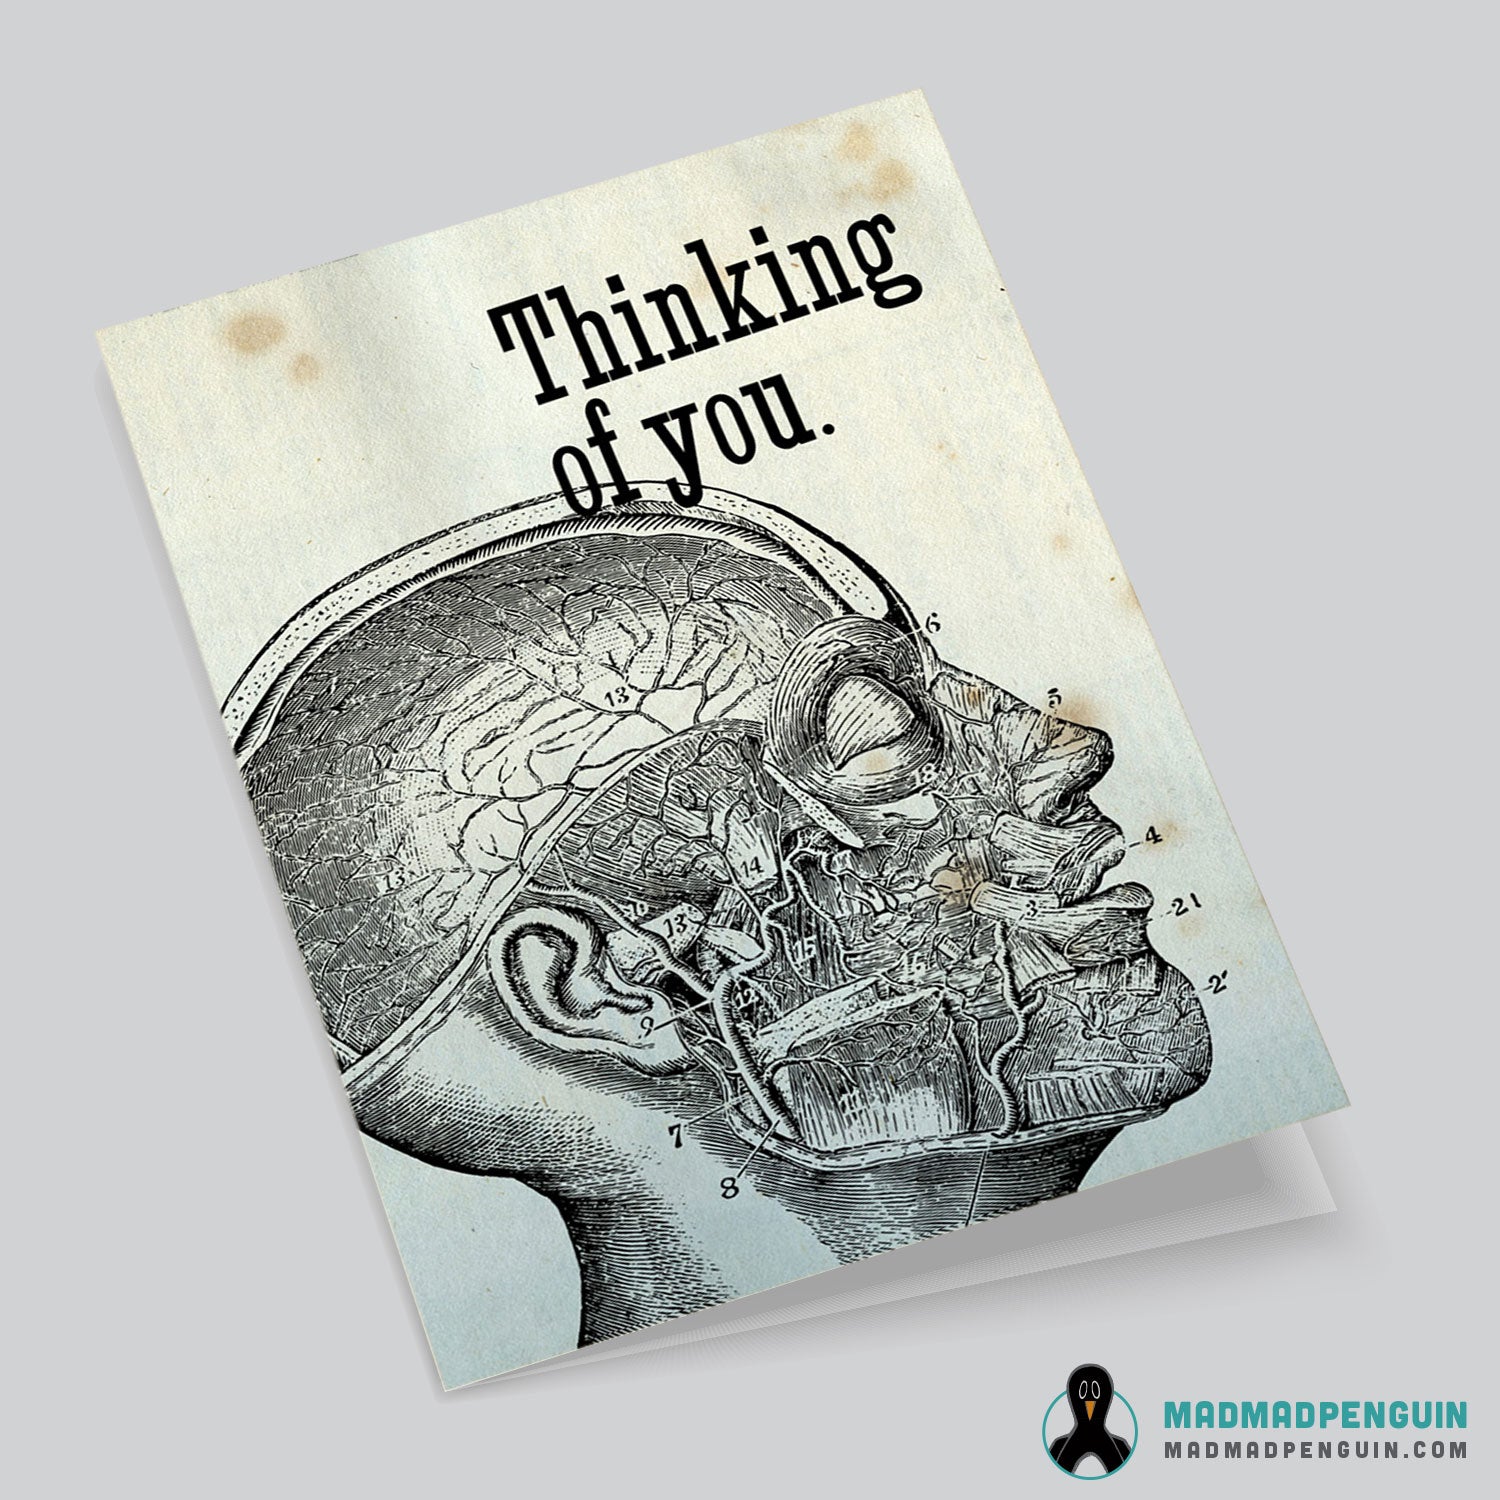 THINKING OF YOU (4.25x5.5 greeting card with envelope)